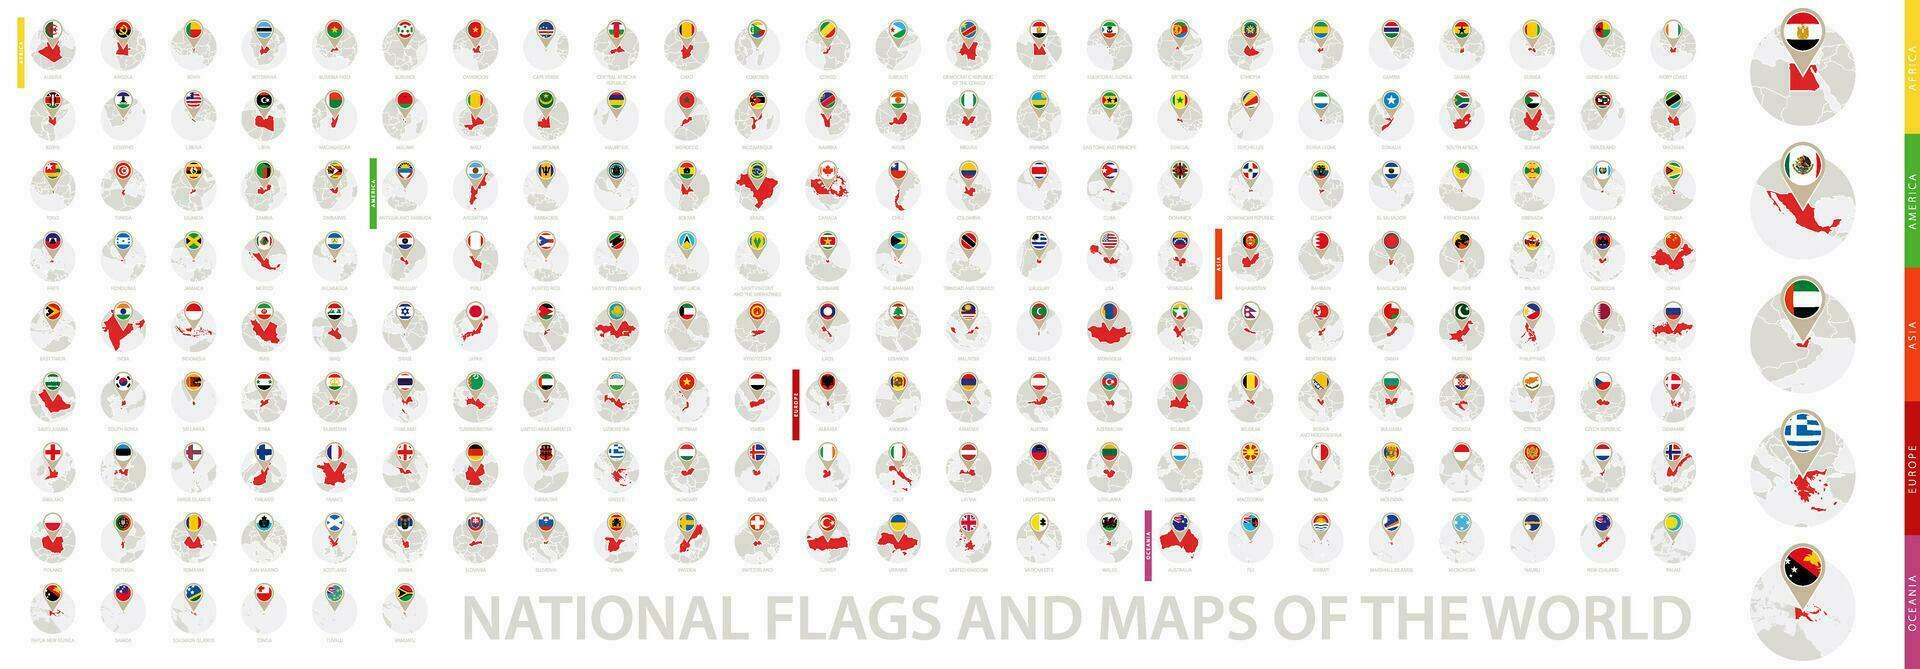 National Flags and Maps of the World, Alphabetically sorted flags and maps. vector